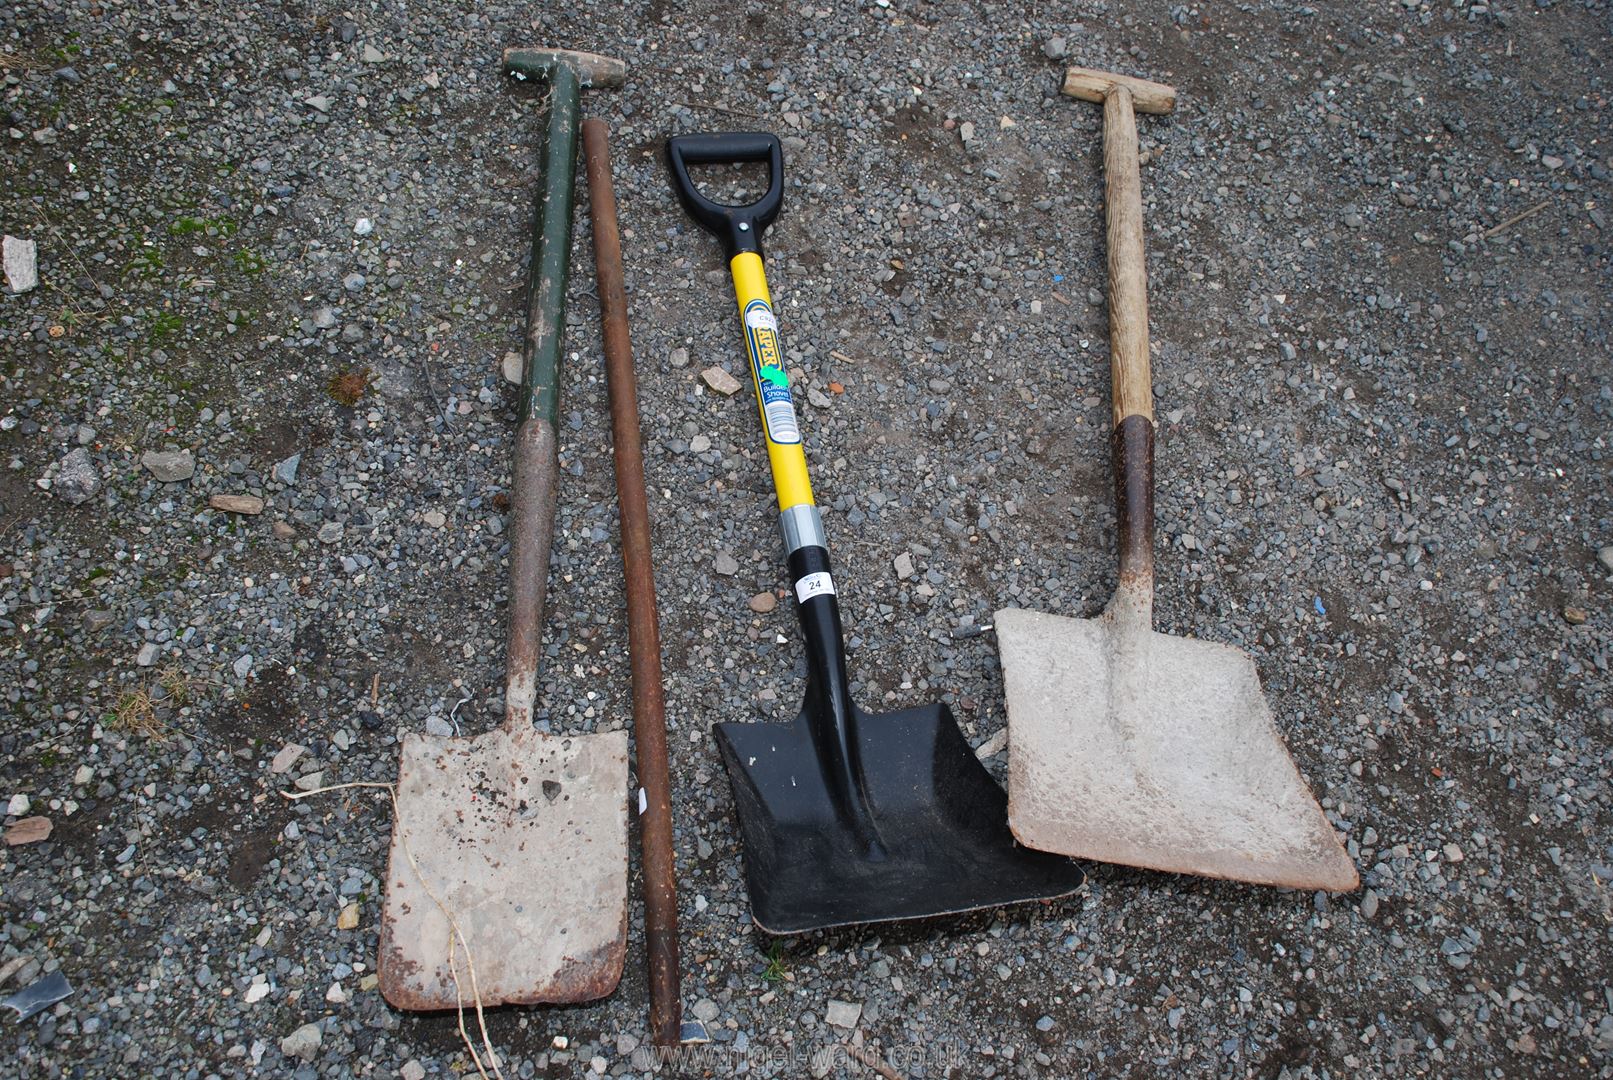 Two shovels, a spade and a metal bar.